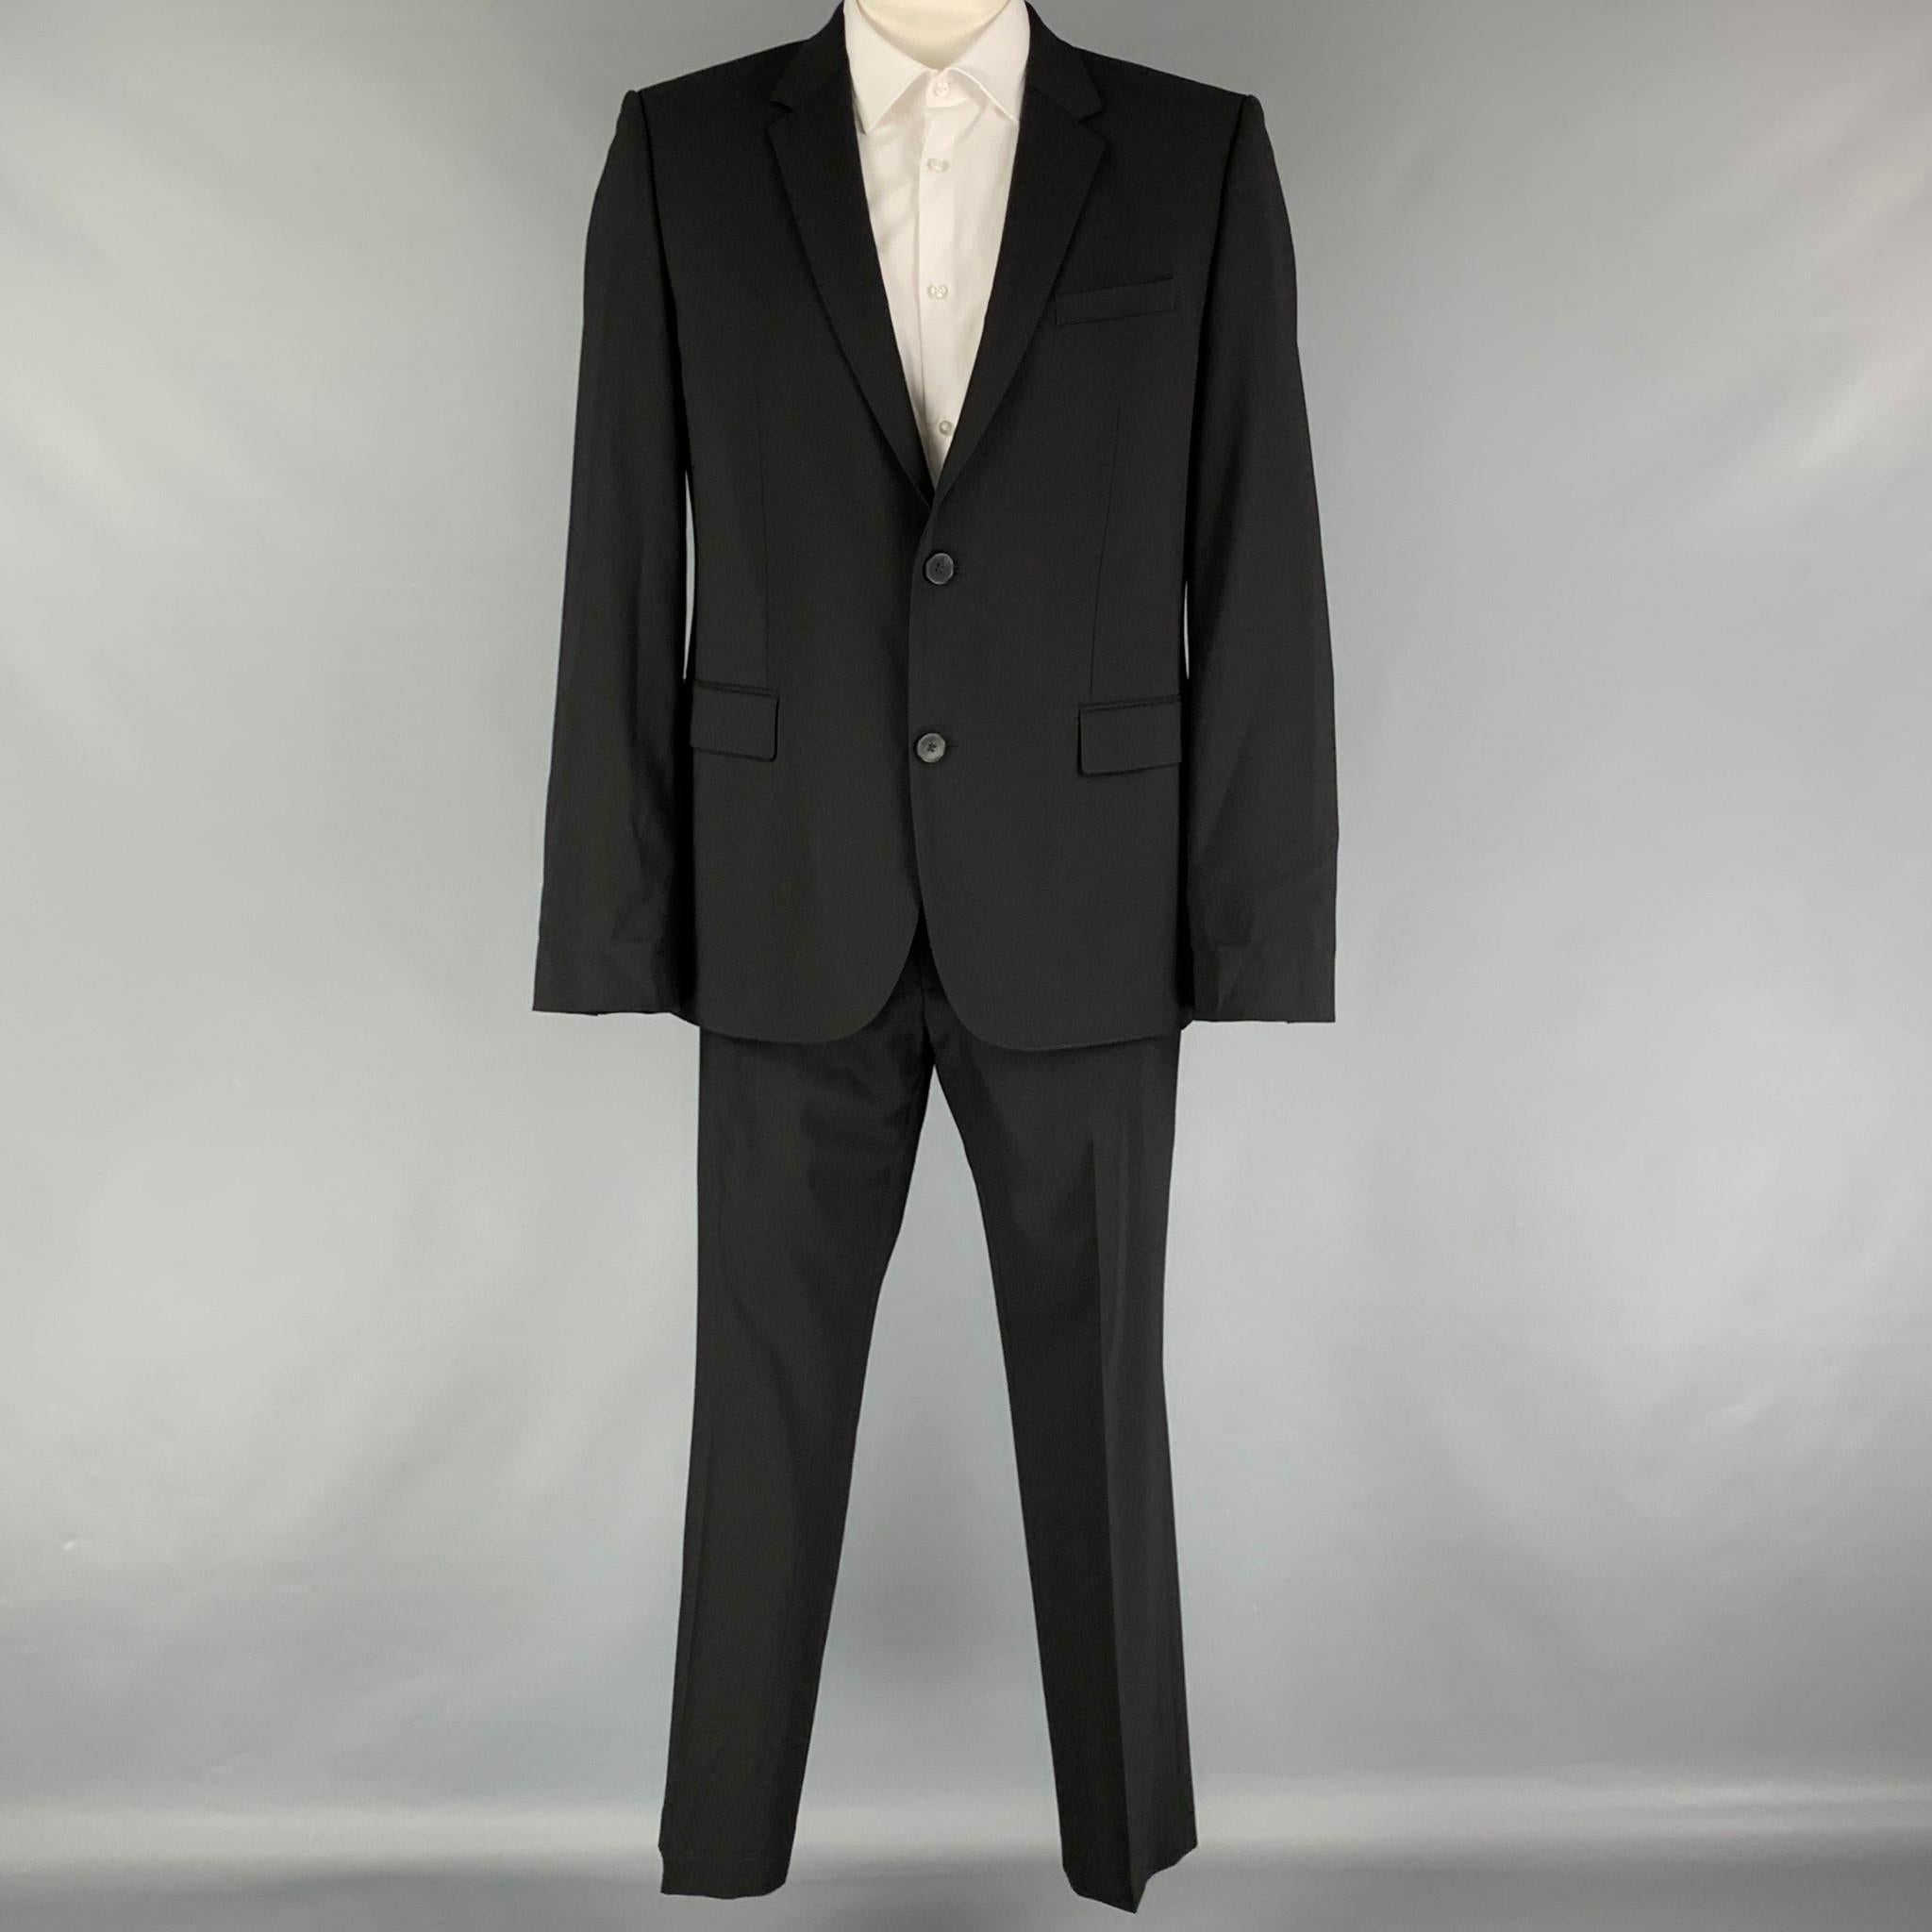 HUGO by HUGO BOSS suit comes in a black virgin wool with a full liner and includes a single breasted, double button sport coat with a notch lapel and matching flat front trousers.

Very Good Pre-Owned Condition. Discoloration at under arms.
Marked: